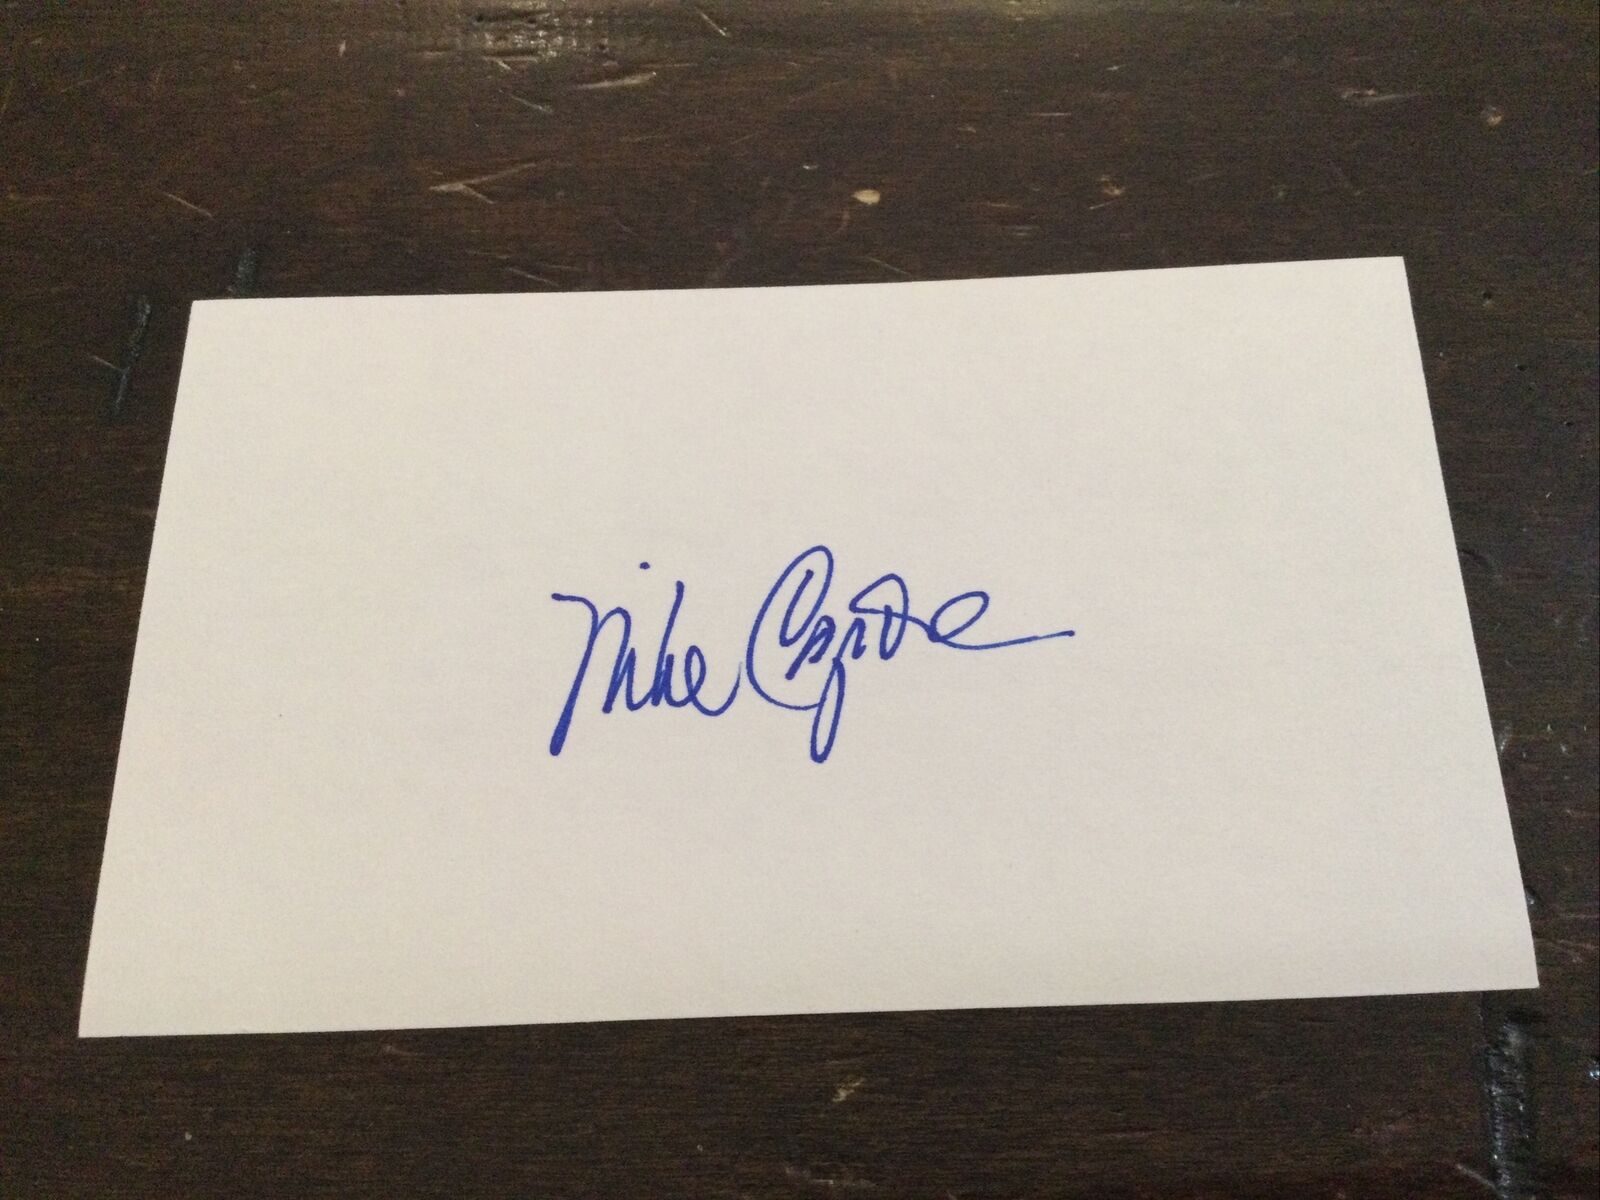 MIKE COSGROVE SIGNED AUTOGRAPH 3X5 INDEX CARD MLB 1972-1976 HOUSTON ASTROS